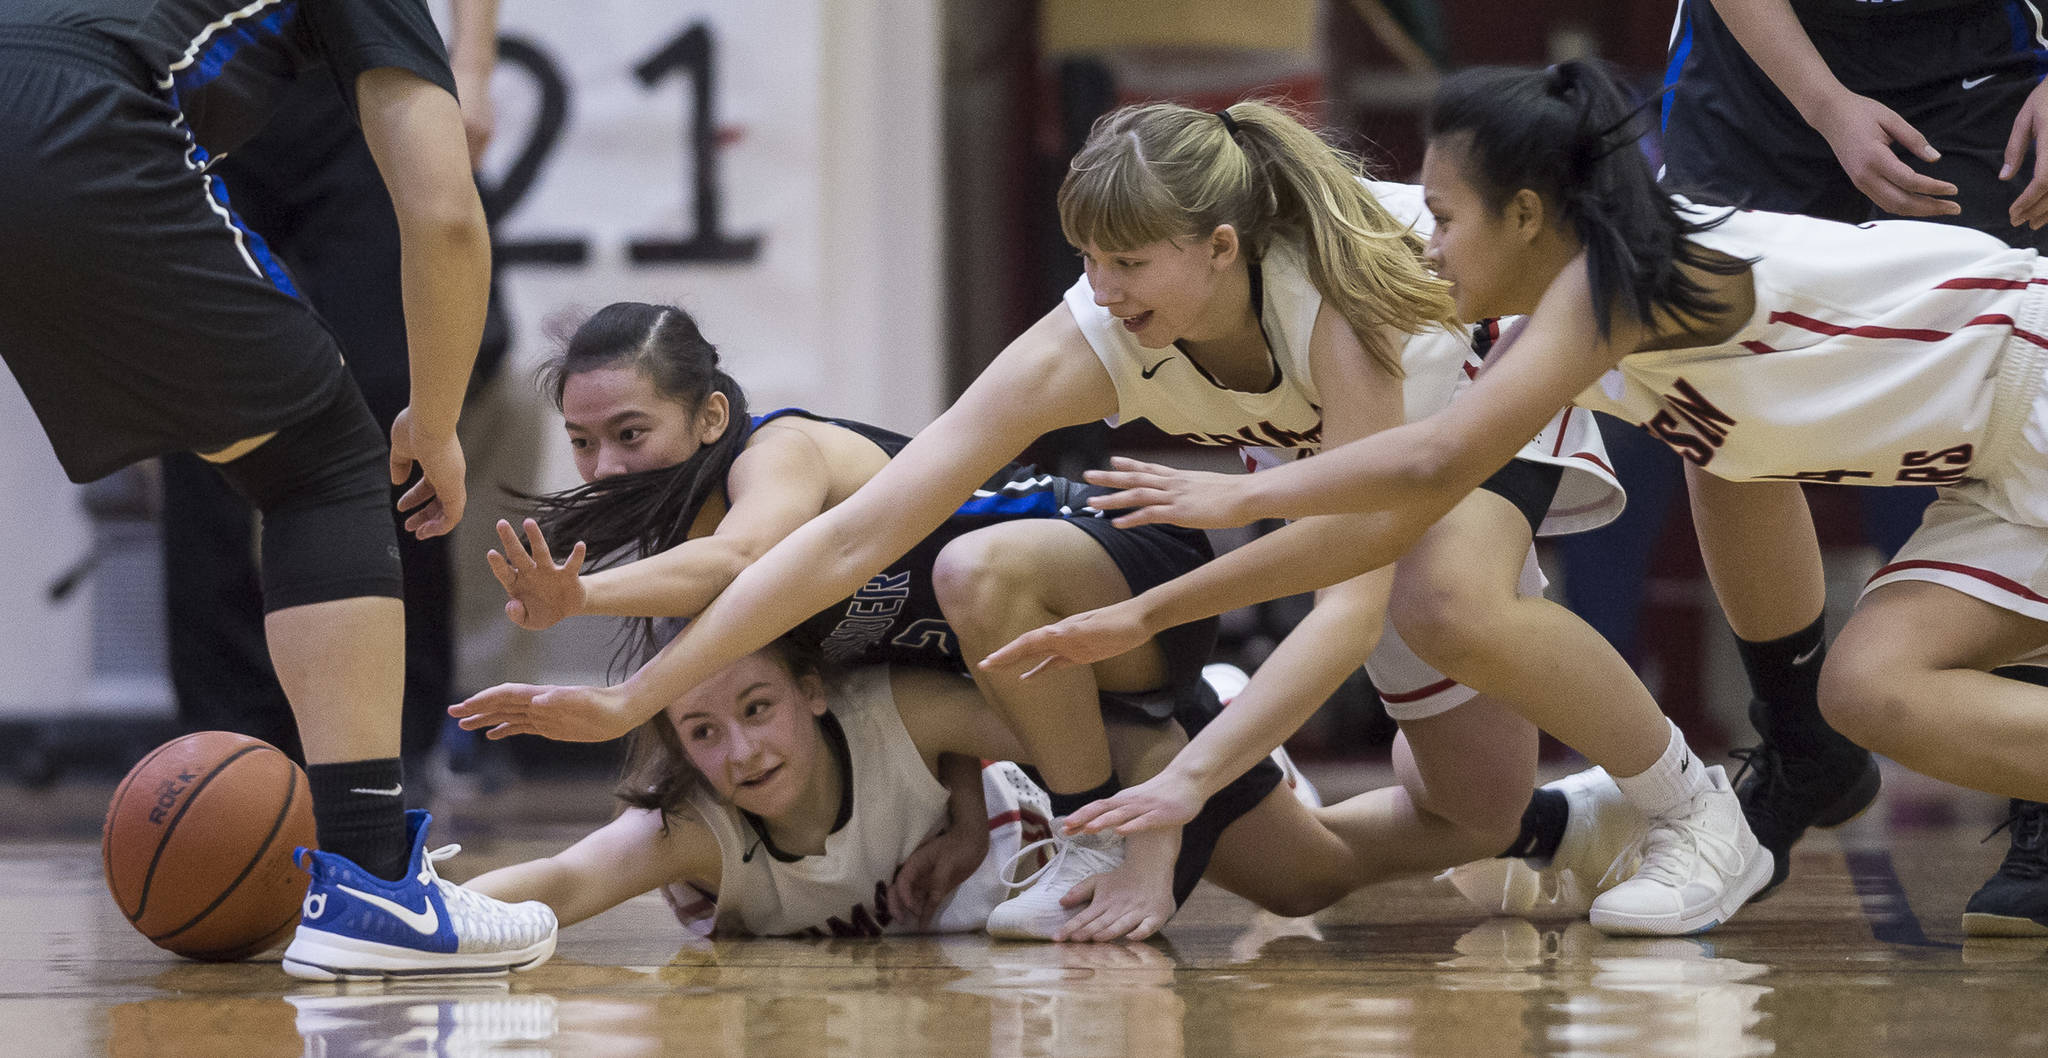 Thunder Mountain’s Kyaye Garcia, left, dives for a loose ball against Juneau-Douglas’ Kiana Potter, bottom left, Caitlin Pusich and Alyxn Bohulano, right, at JDHS on Friday, March 3, 2018. JDHS won 53-33.